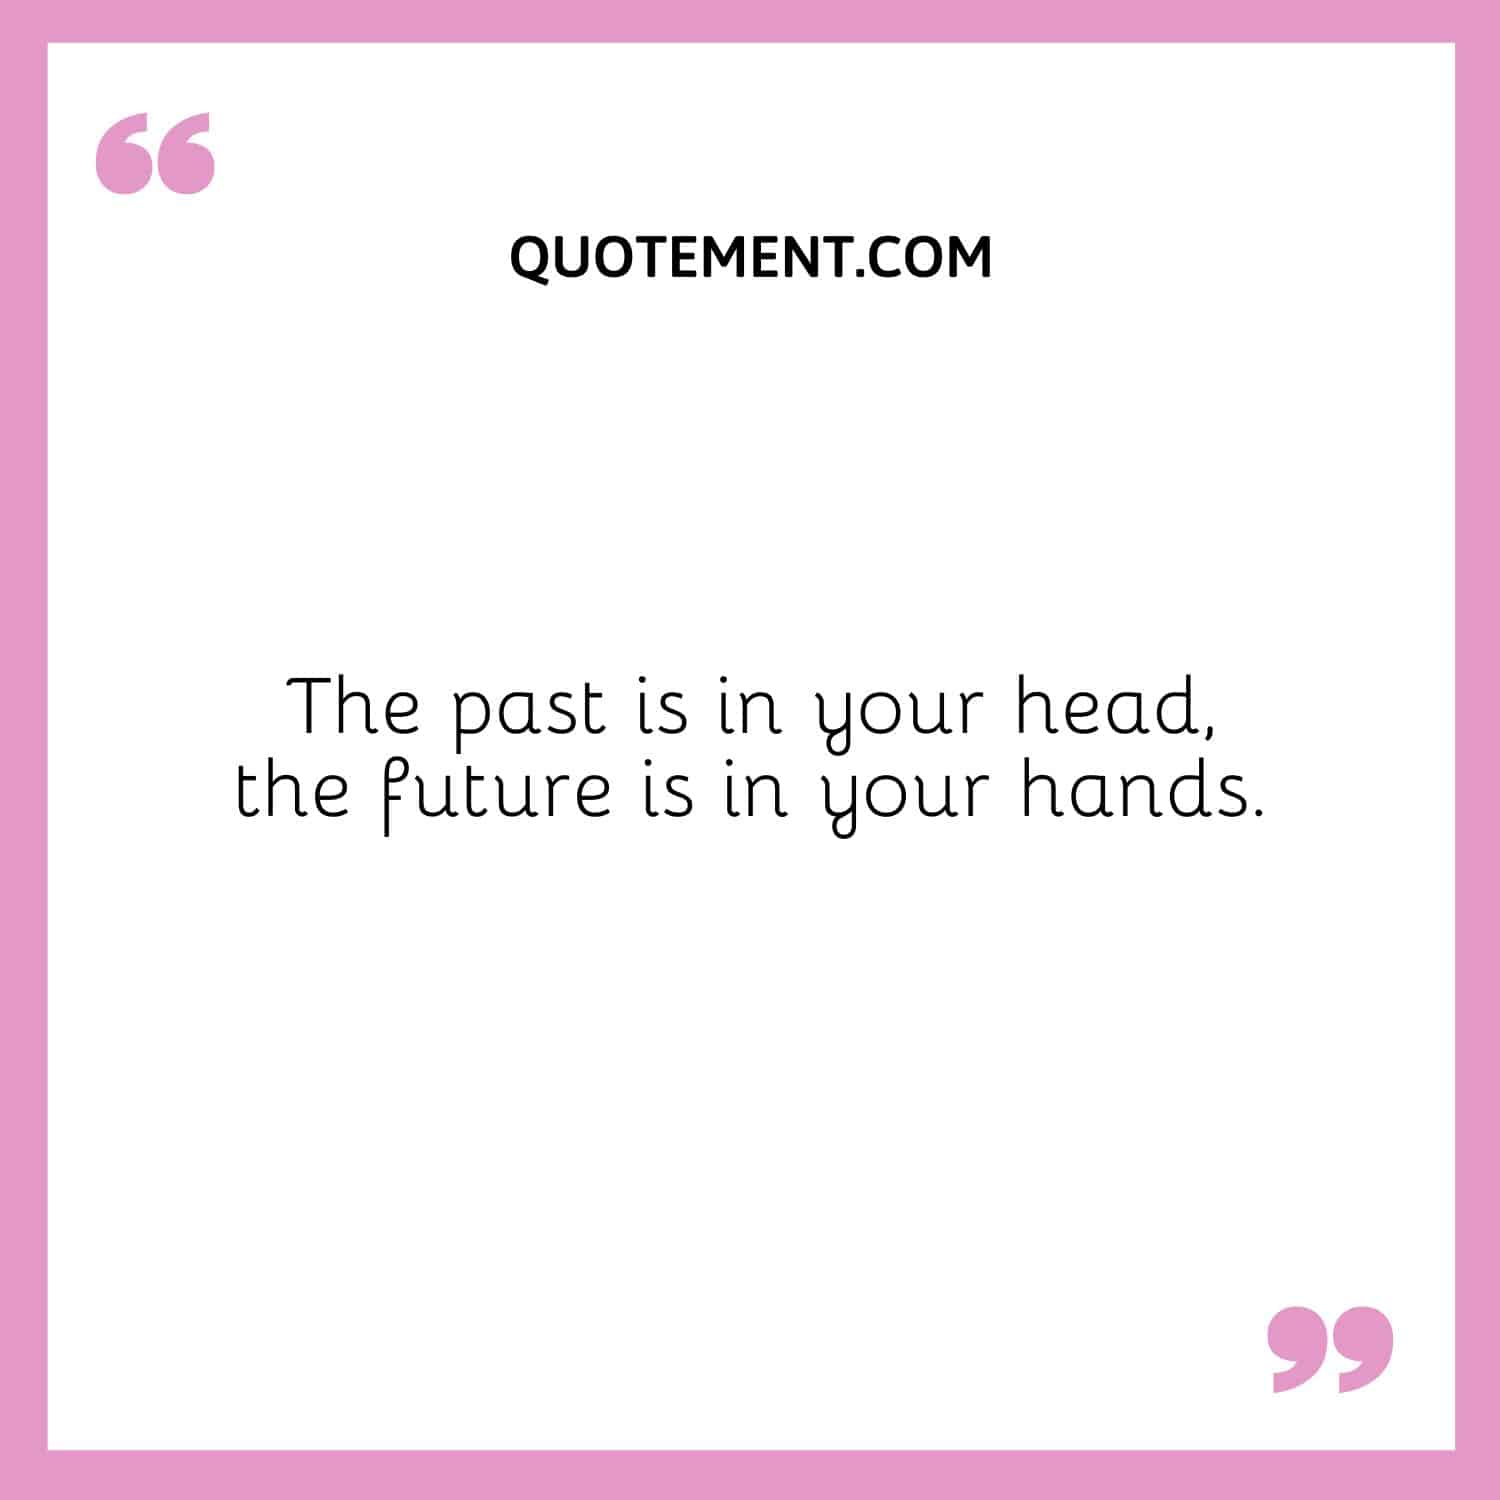 The past is in your head,